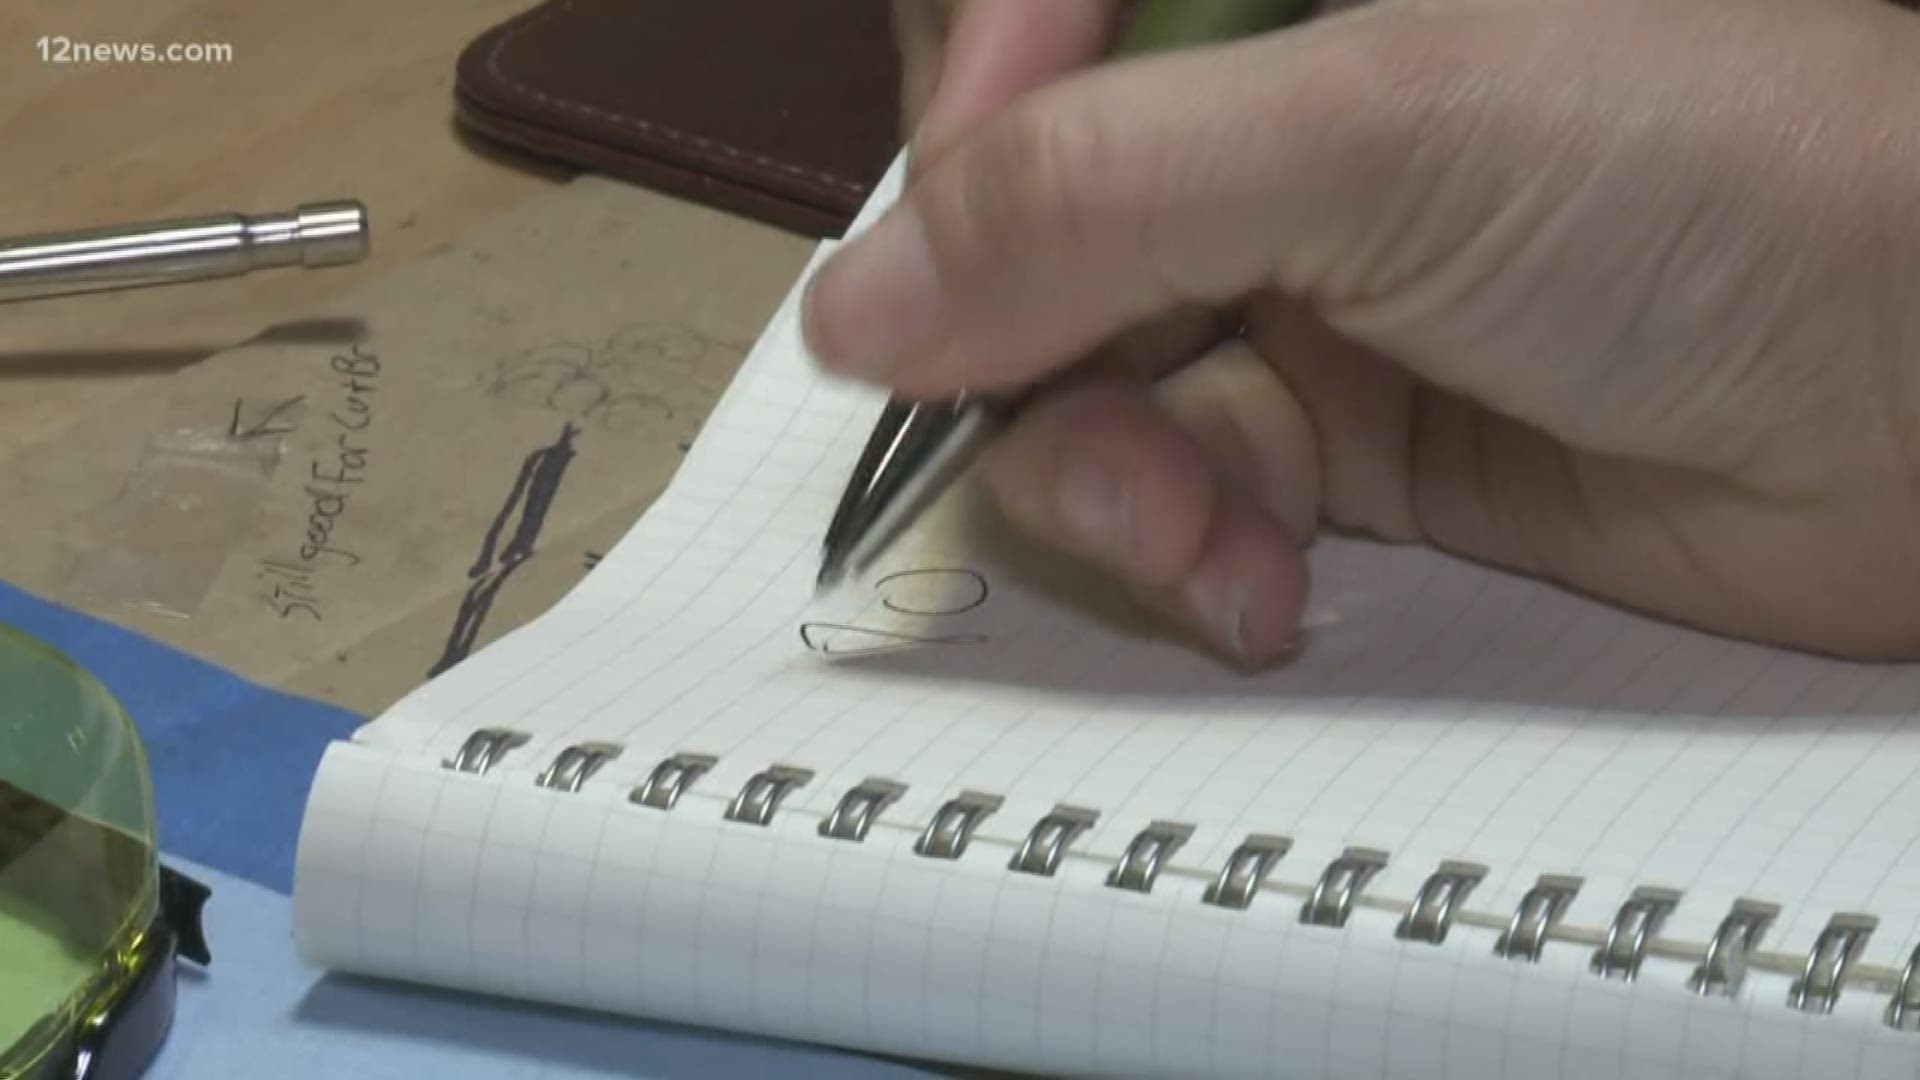 Tuff Writer in Phoenix is producing high-quality, luxury pens in the Valley. Monica Garcia has the details.